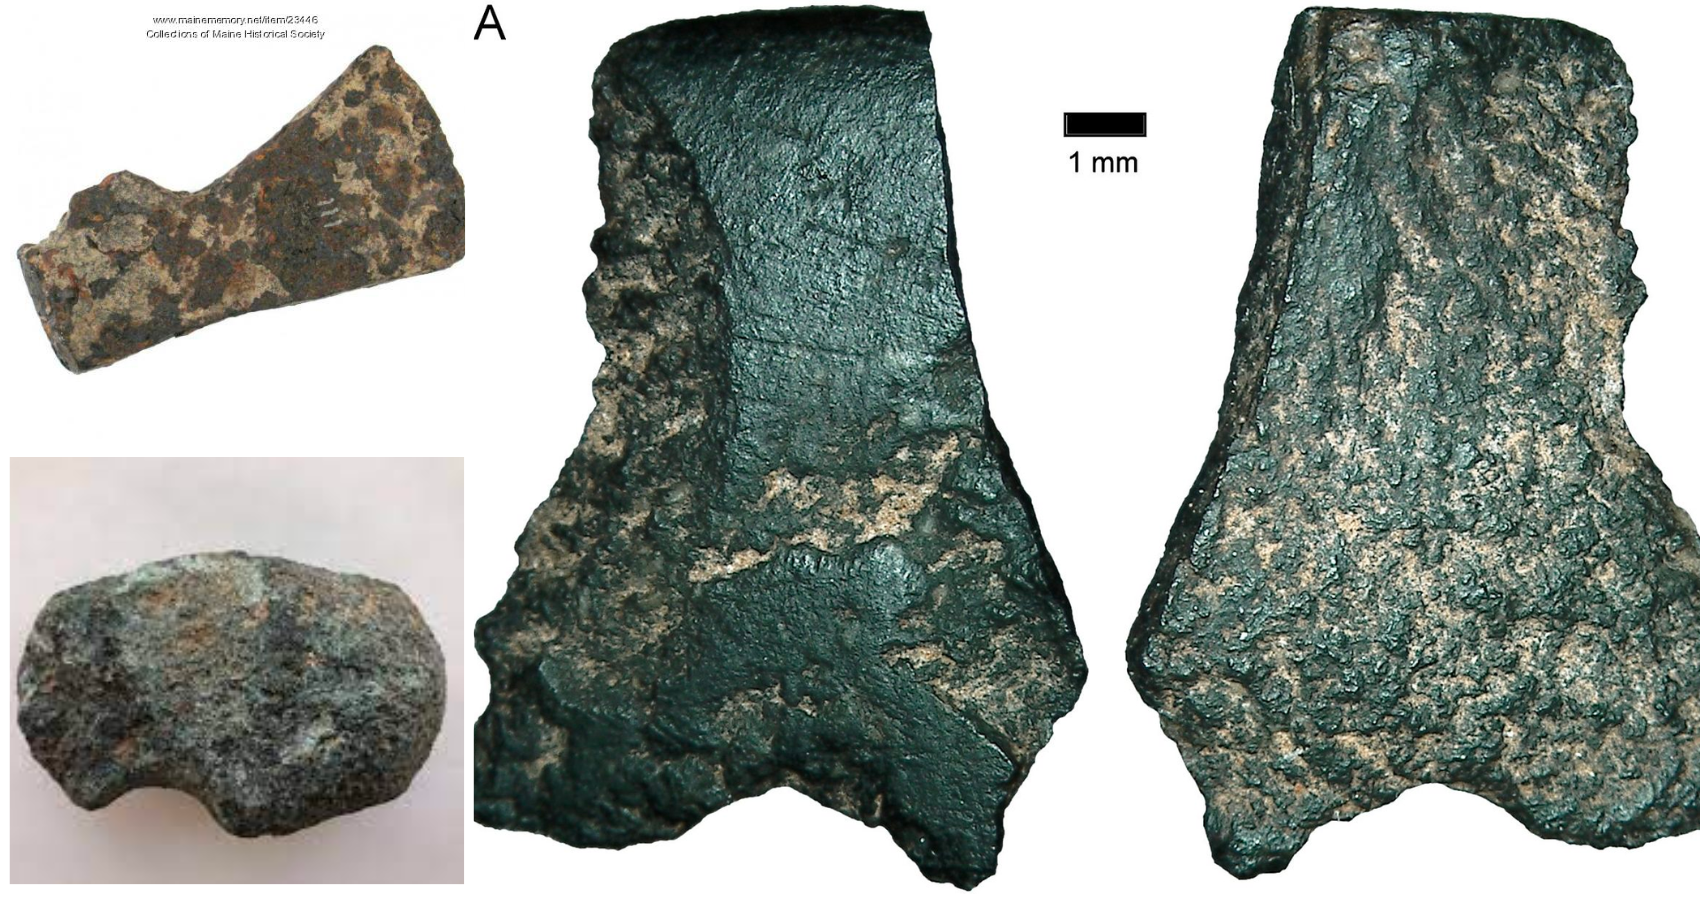 Archaeologists discover world’s oldest axe